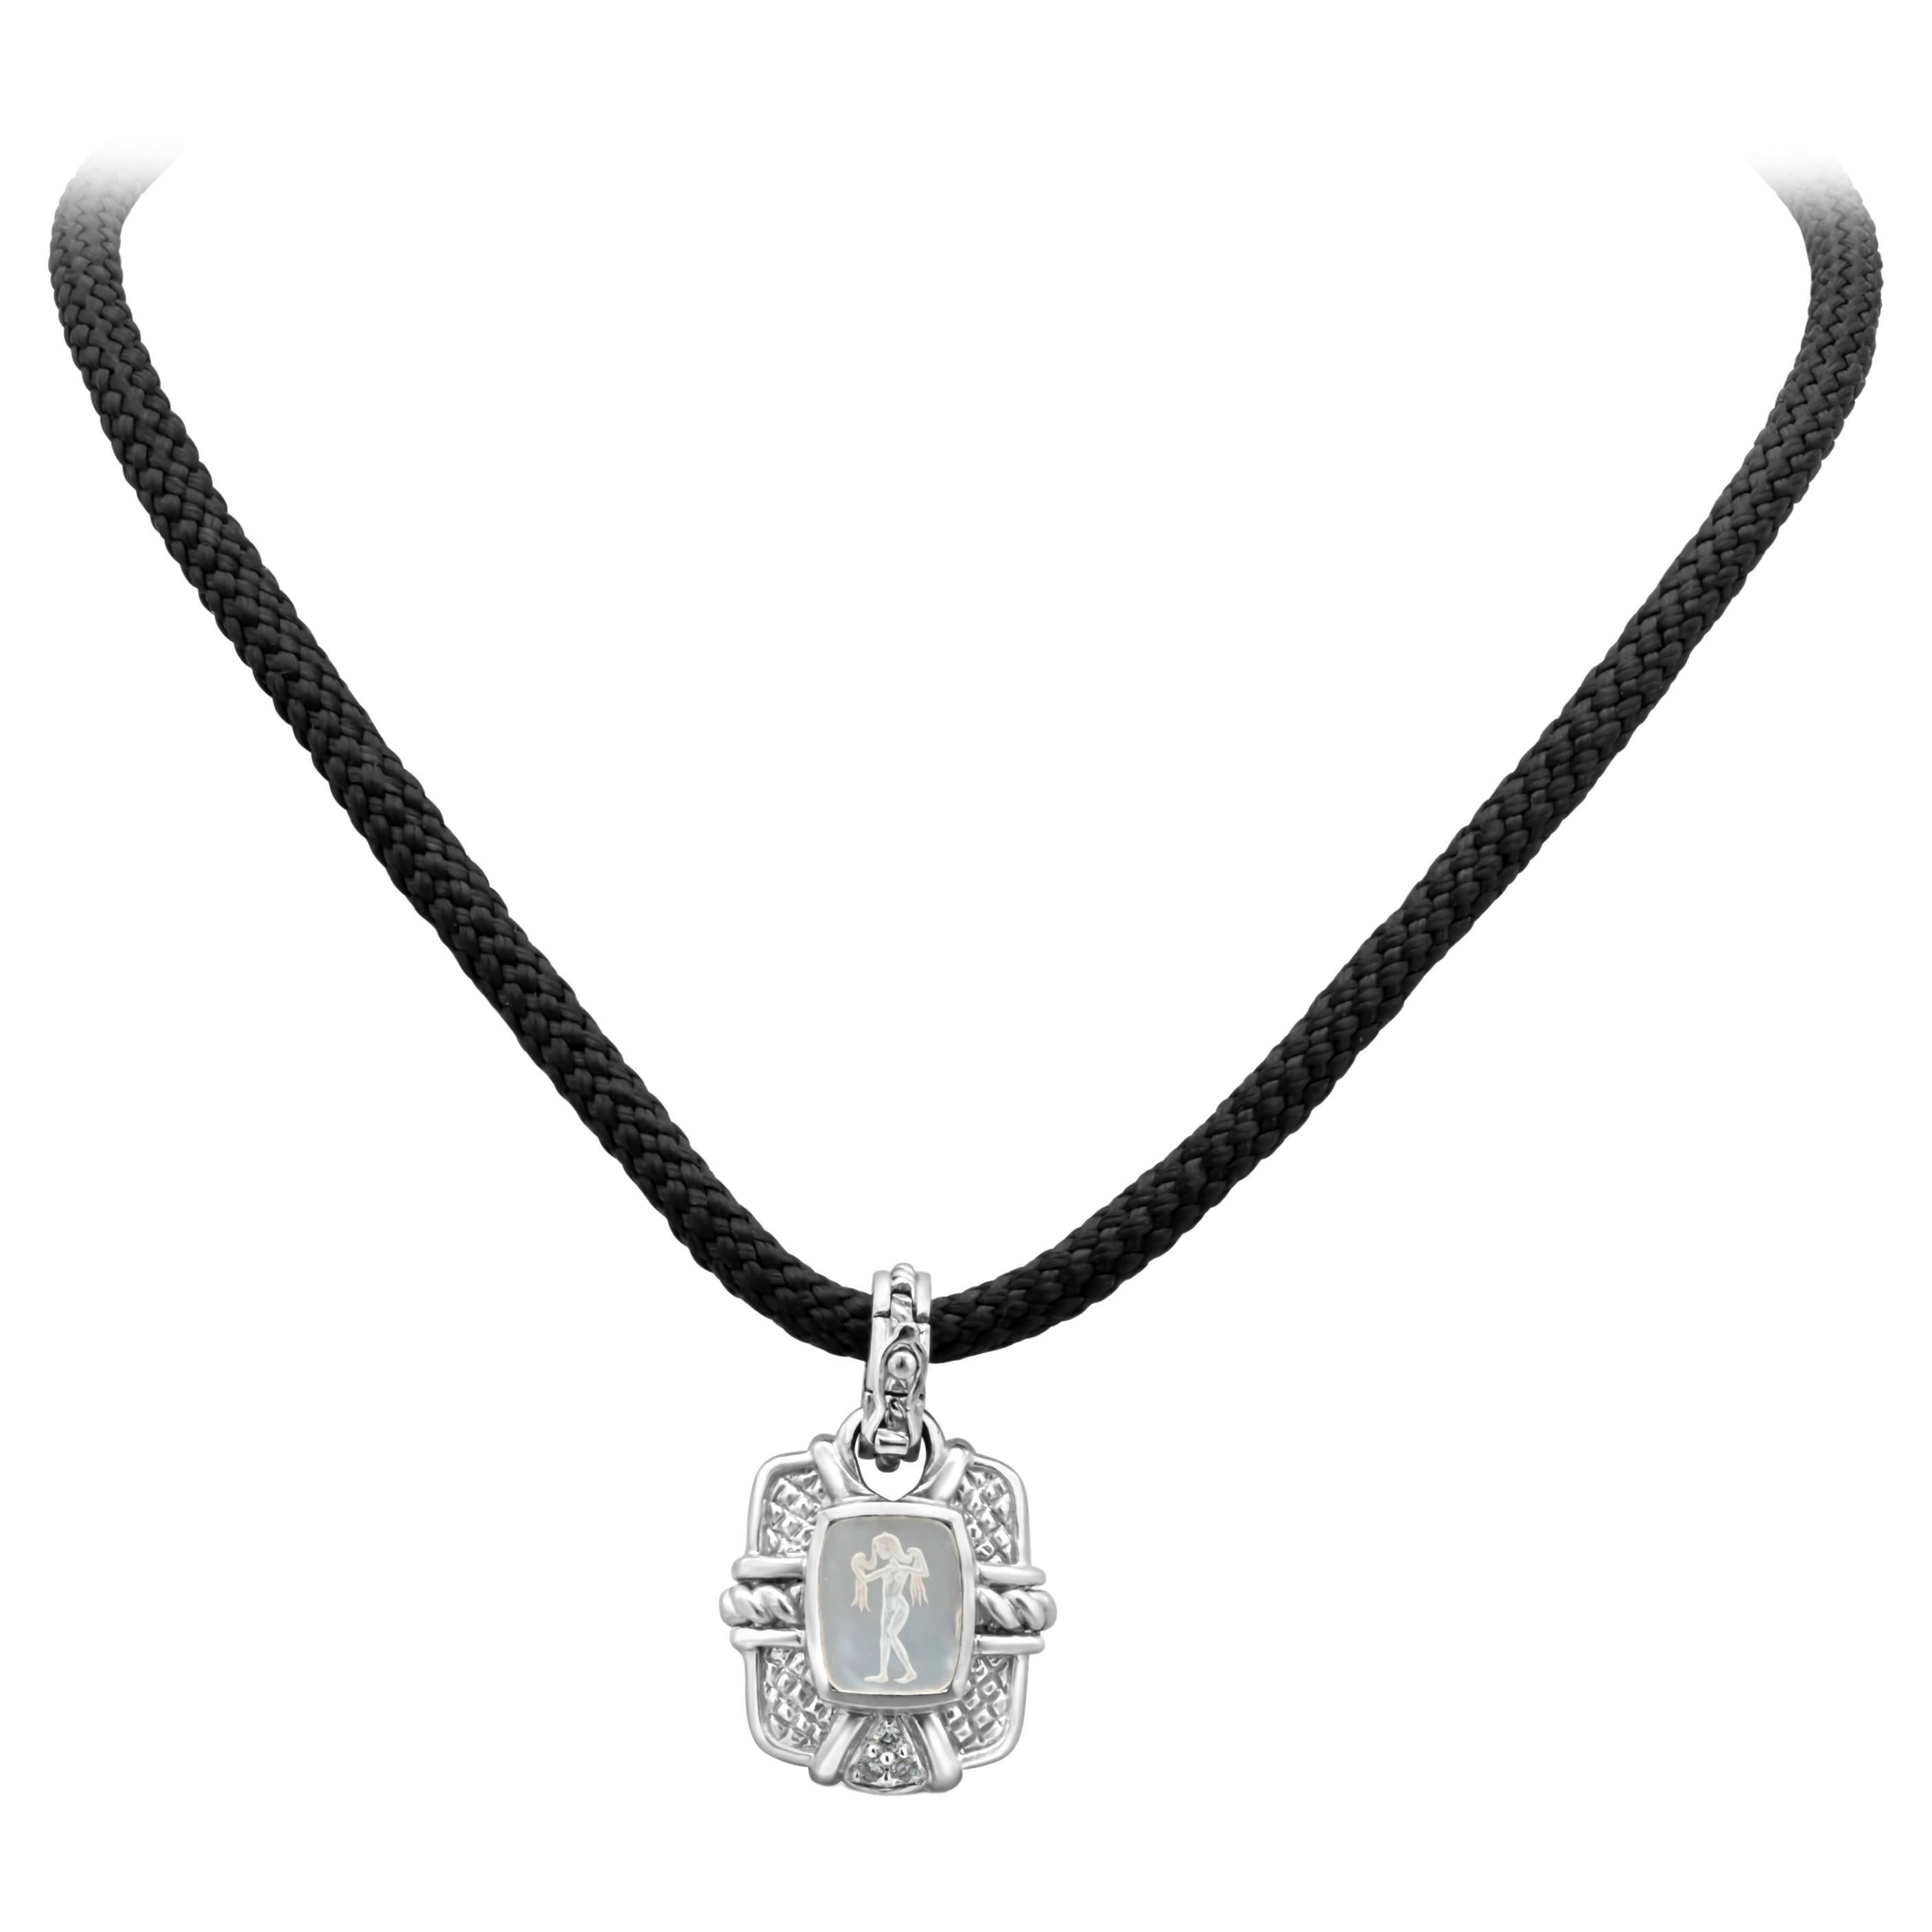 Judith Ripka Black Silk String Necklace with Antique White Gold Pendant For Sale